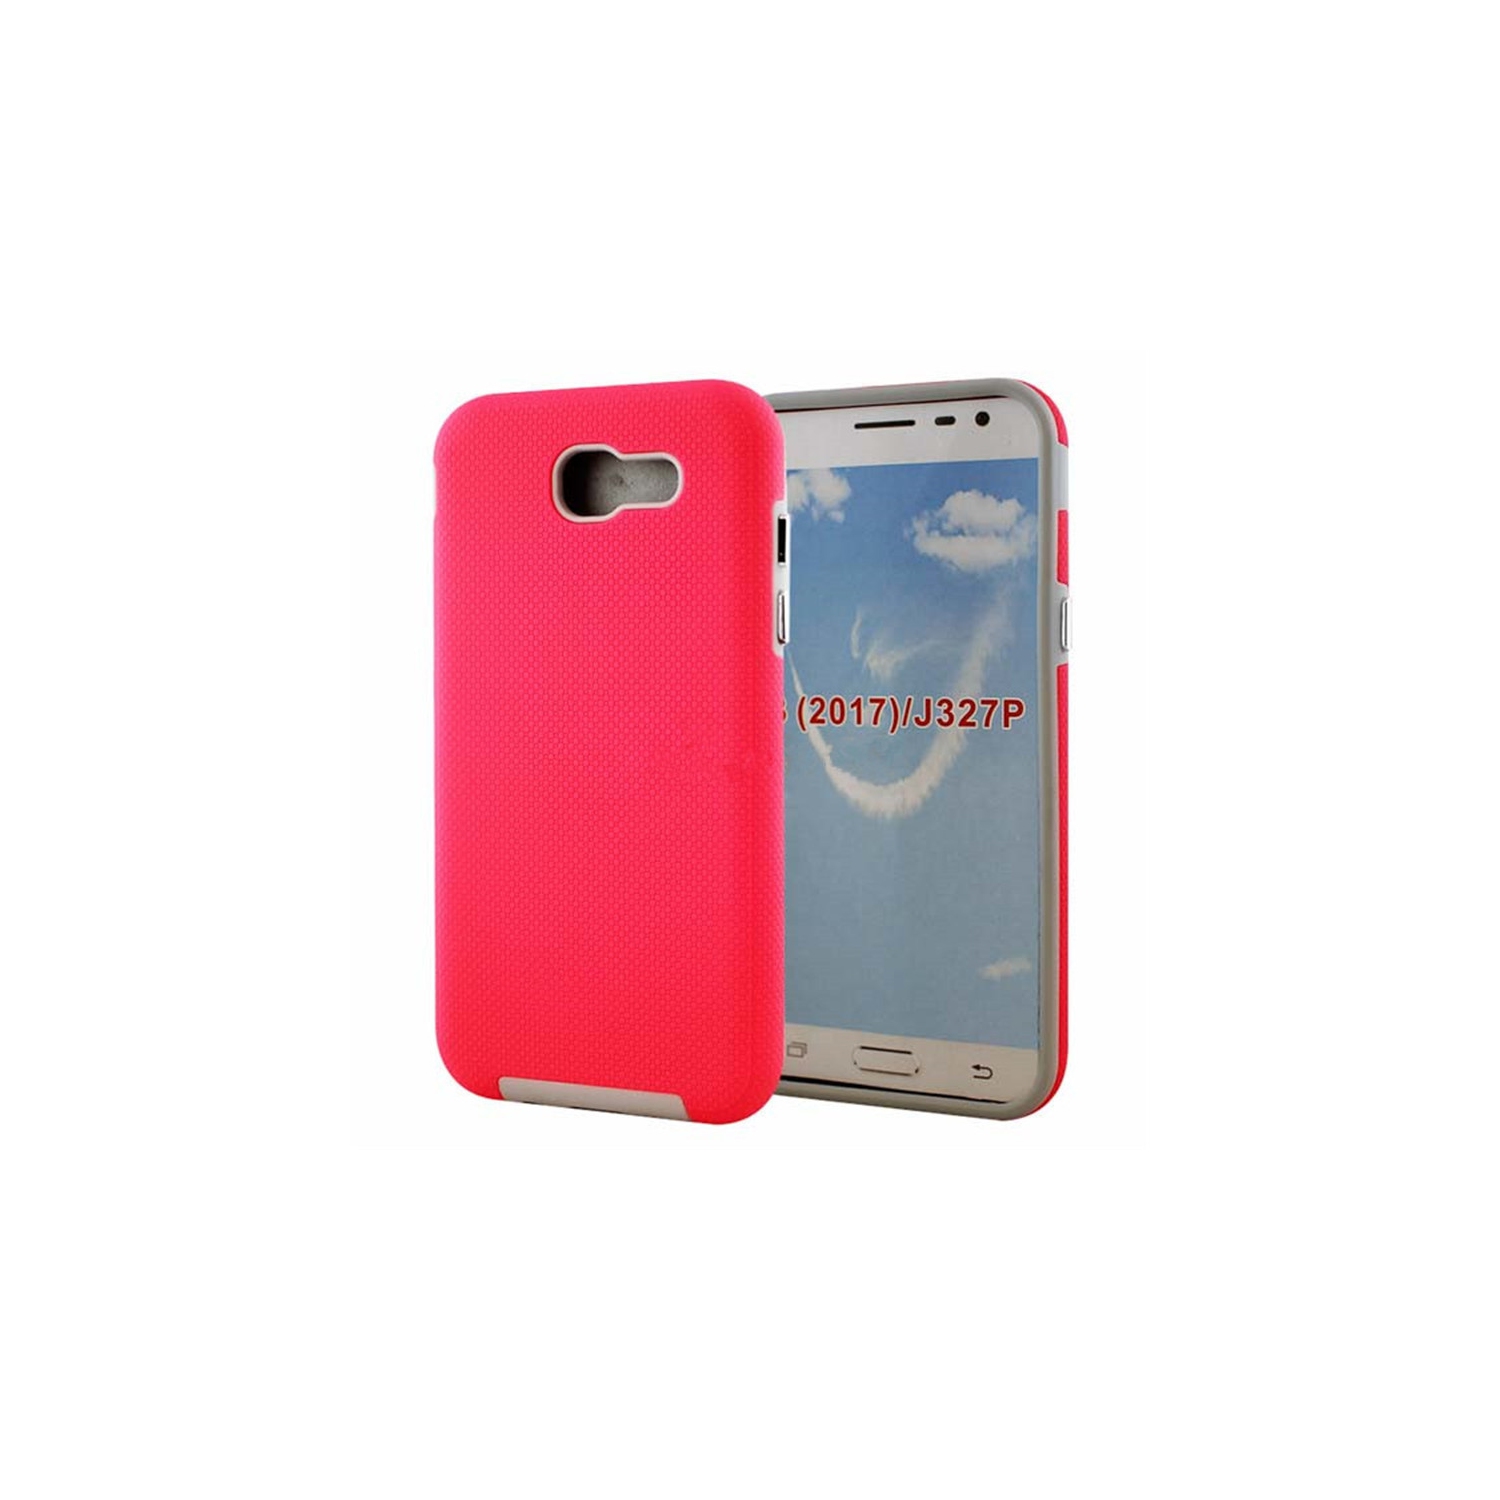 【CSmart】 Slim Fitted Hybrid Hard PC Shell Shockproof Scratch Resistant Case Cover for Samsung Galaxy J3 Prime 2017, Hot Pink